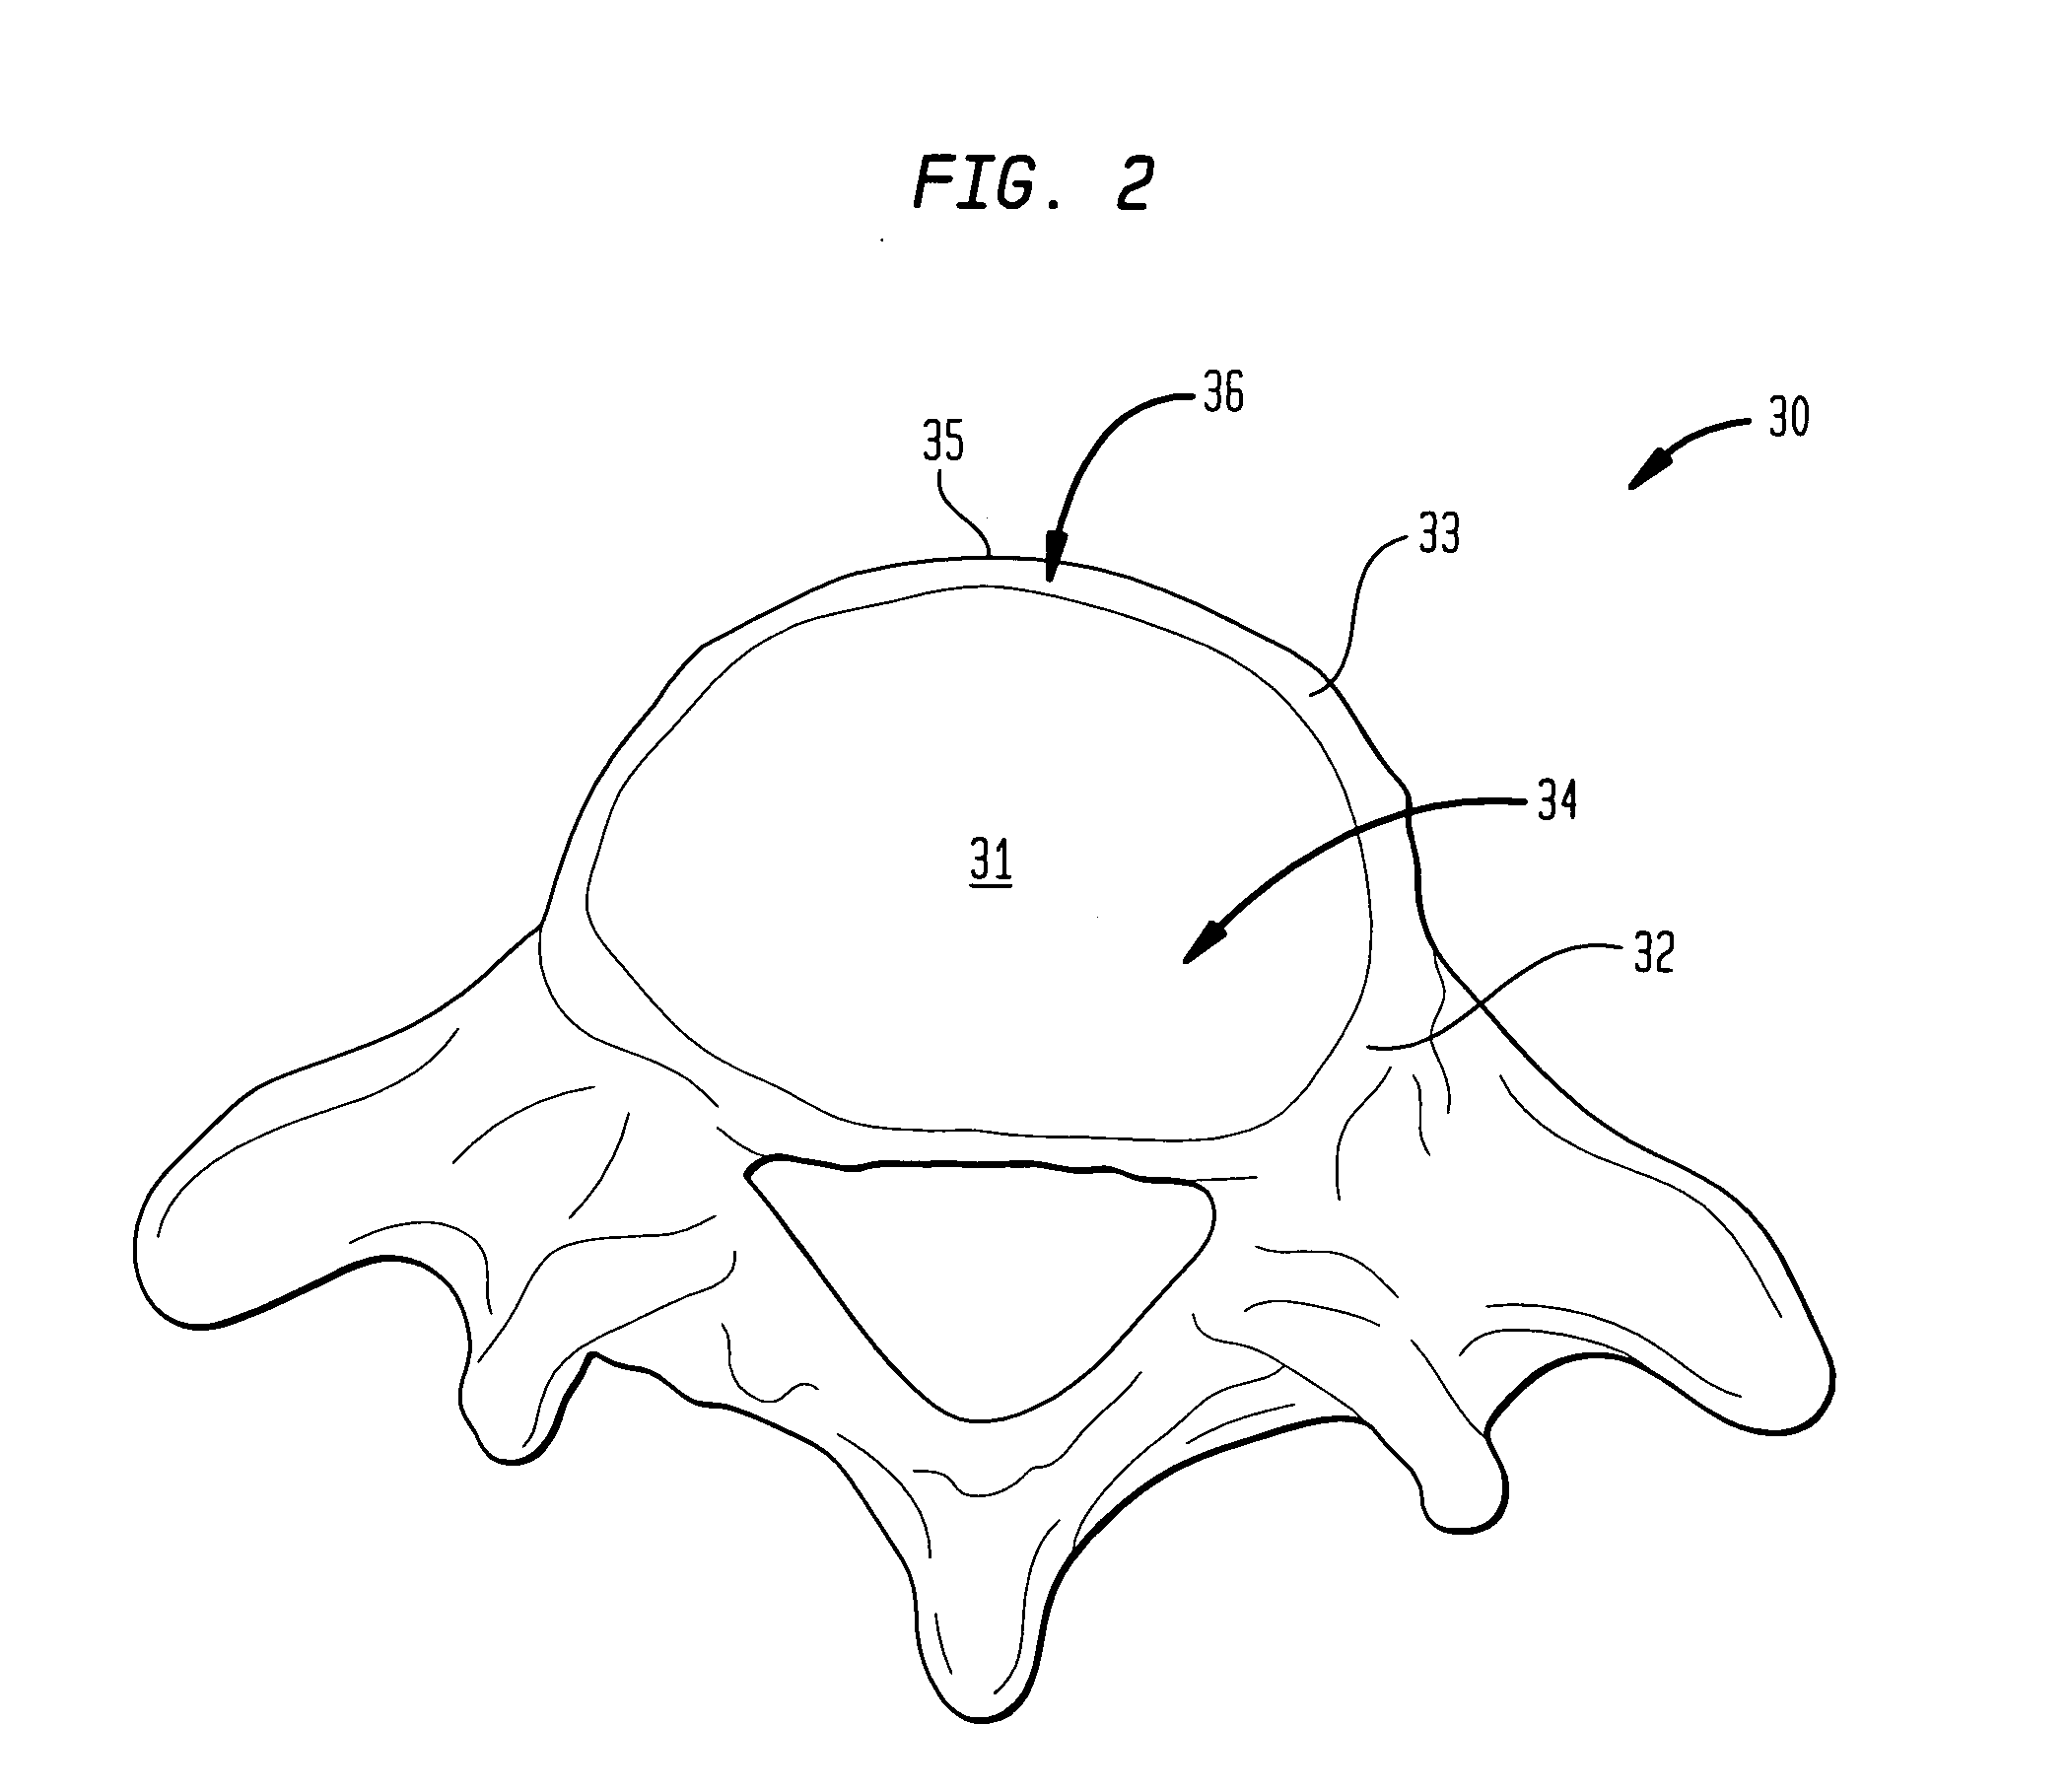 Spinal implant apparatus and methods